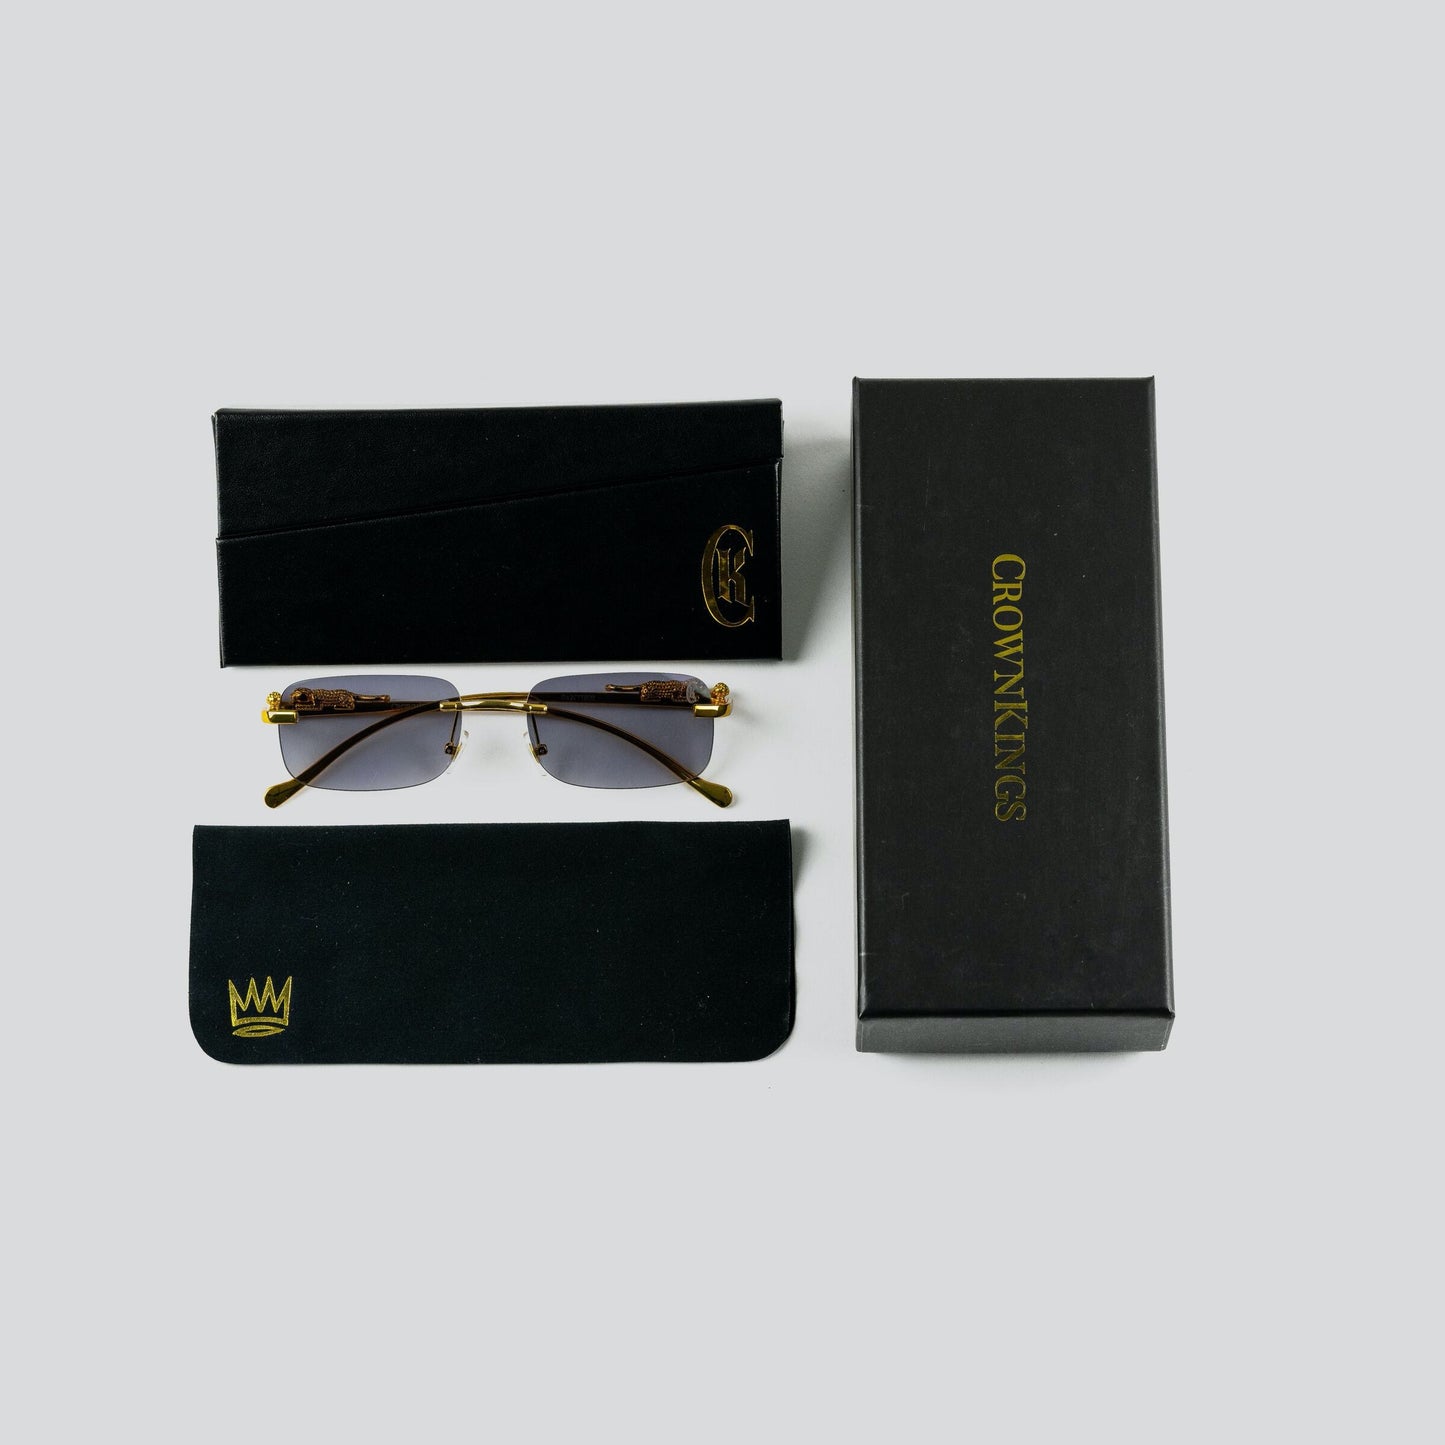 Crown Kings The Panther Sunglasses - Midnight Gold